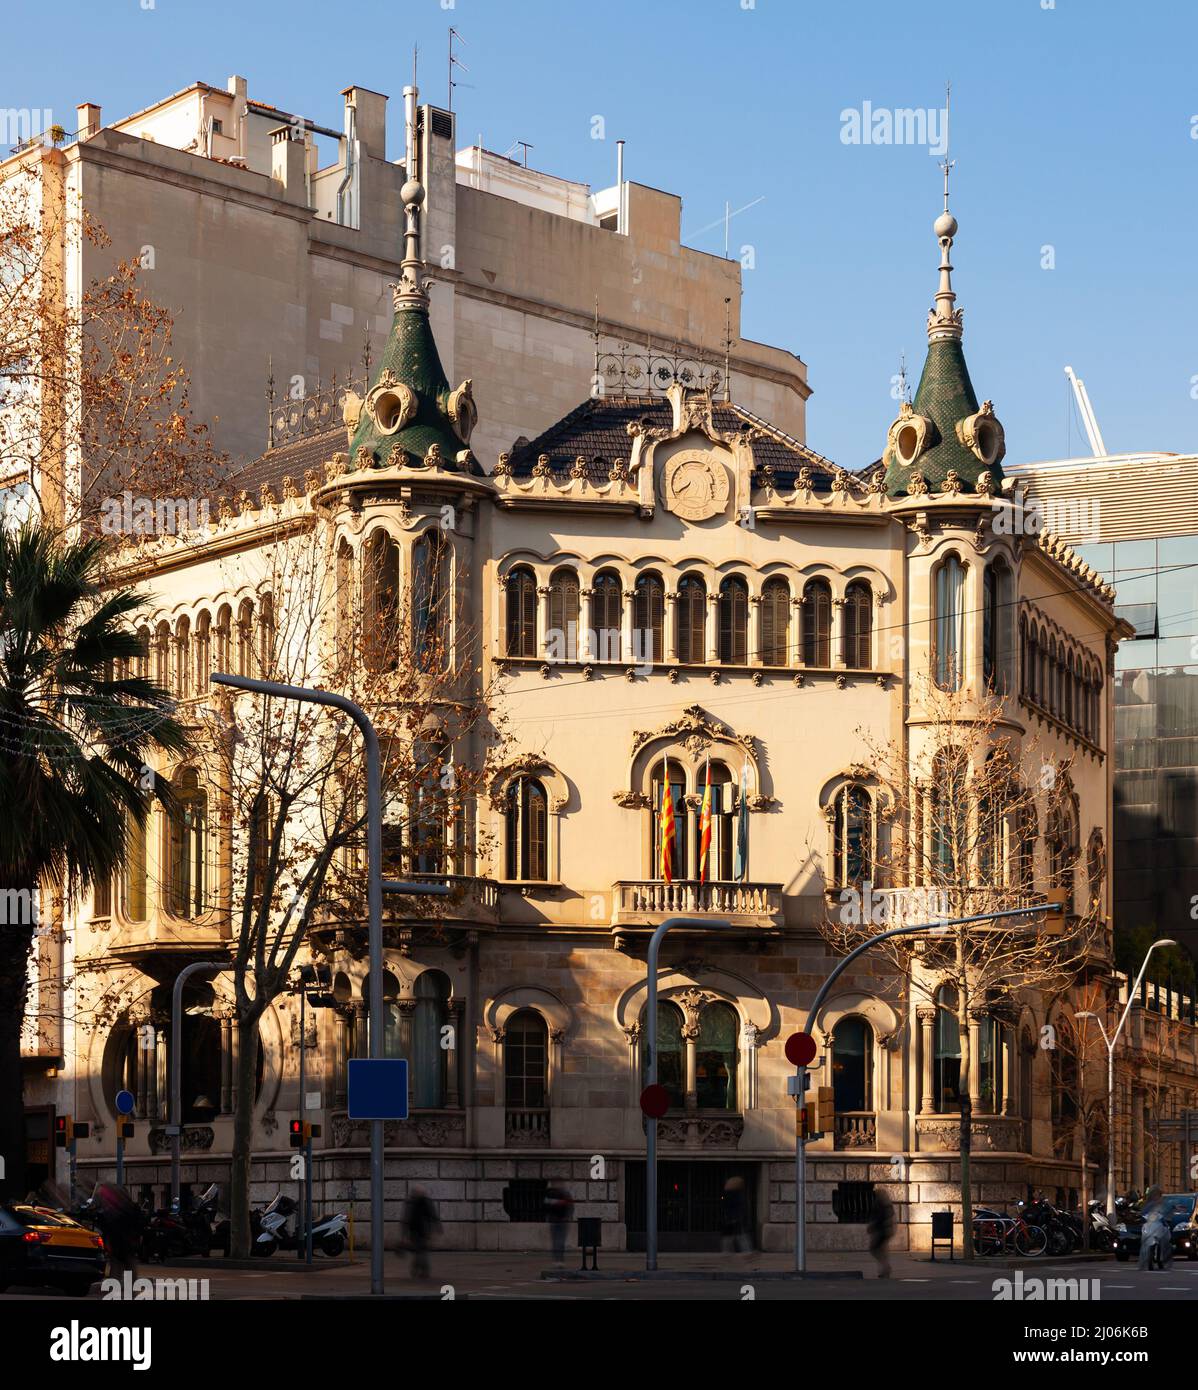 View of the palace Home Samanillo, built by architect Juan Jose Ervas Arizmendi in the Art Nouveau style in Barcelona, .Spain Stock Photo